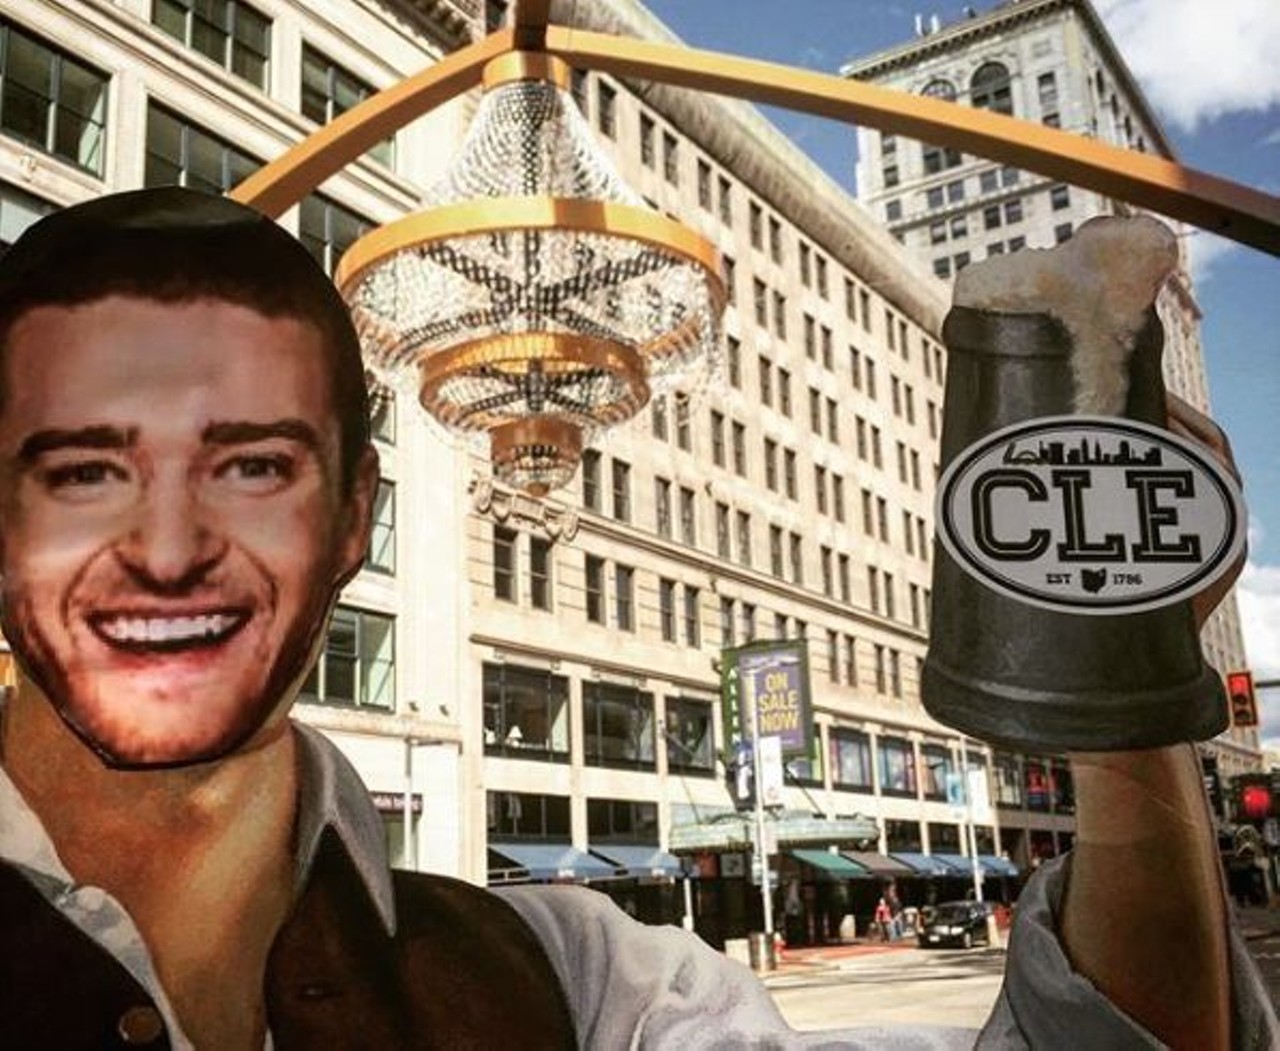  Playhouse Square&#146;s Chandelier 
Playhouse Square
The huge outdoor chandelier illuminating Playhouse Square is the biggest in the world and a beautiful backdrop for a selfie. Its iconic location lets people know that you actually are cultured, despite whatever they may believe.
Photo via cardboardjt/Instagram